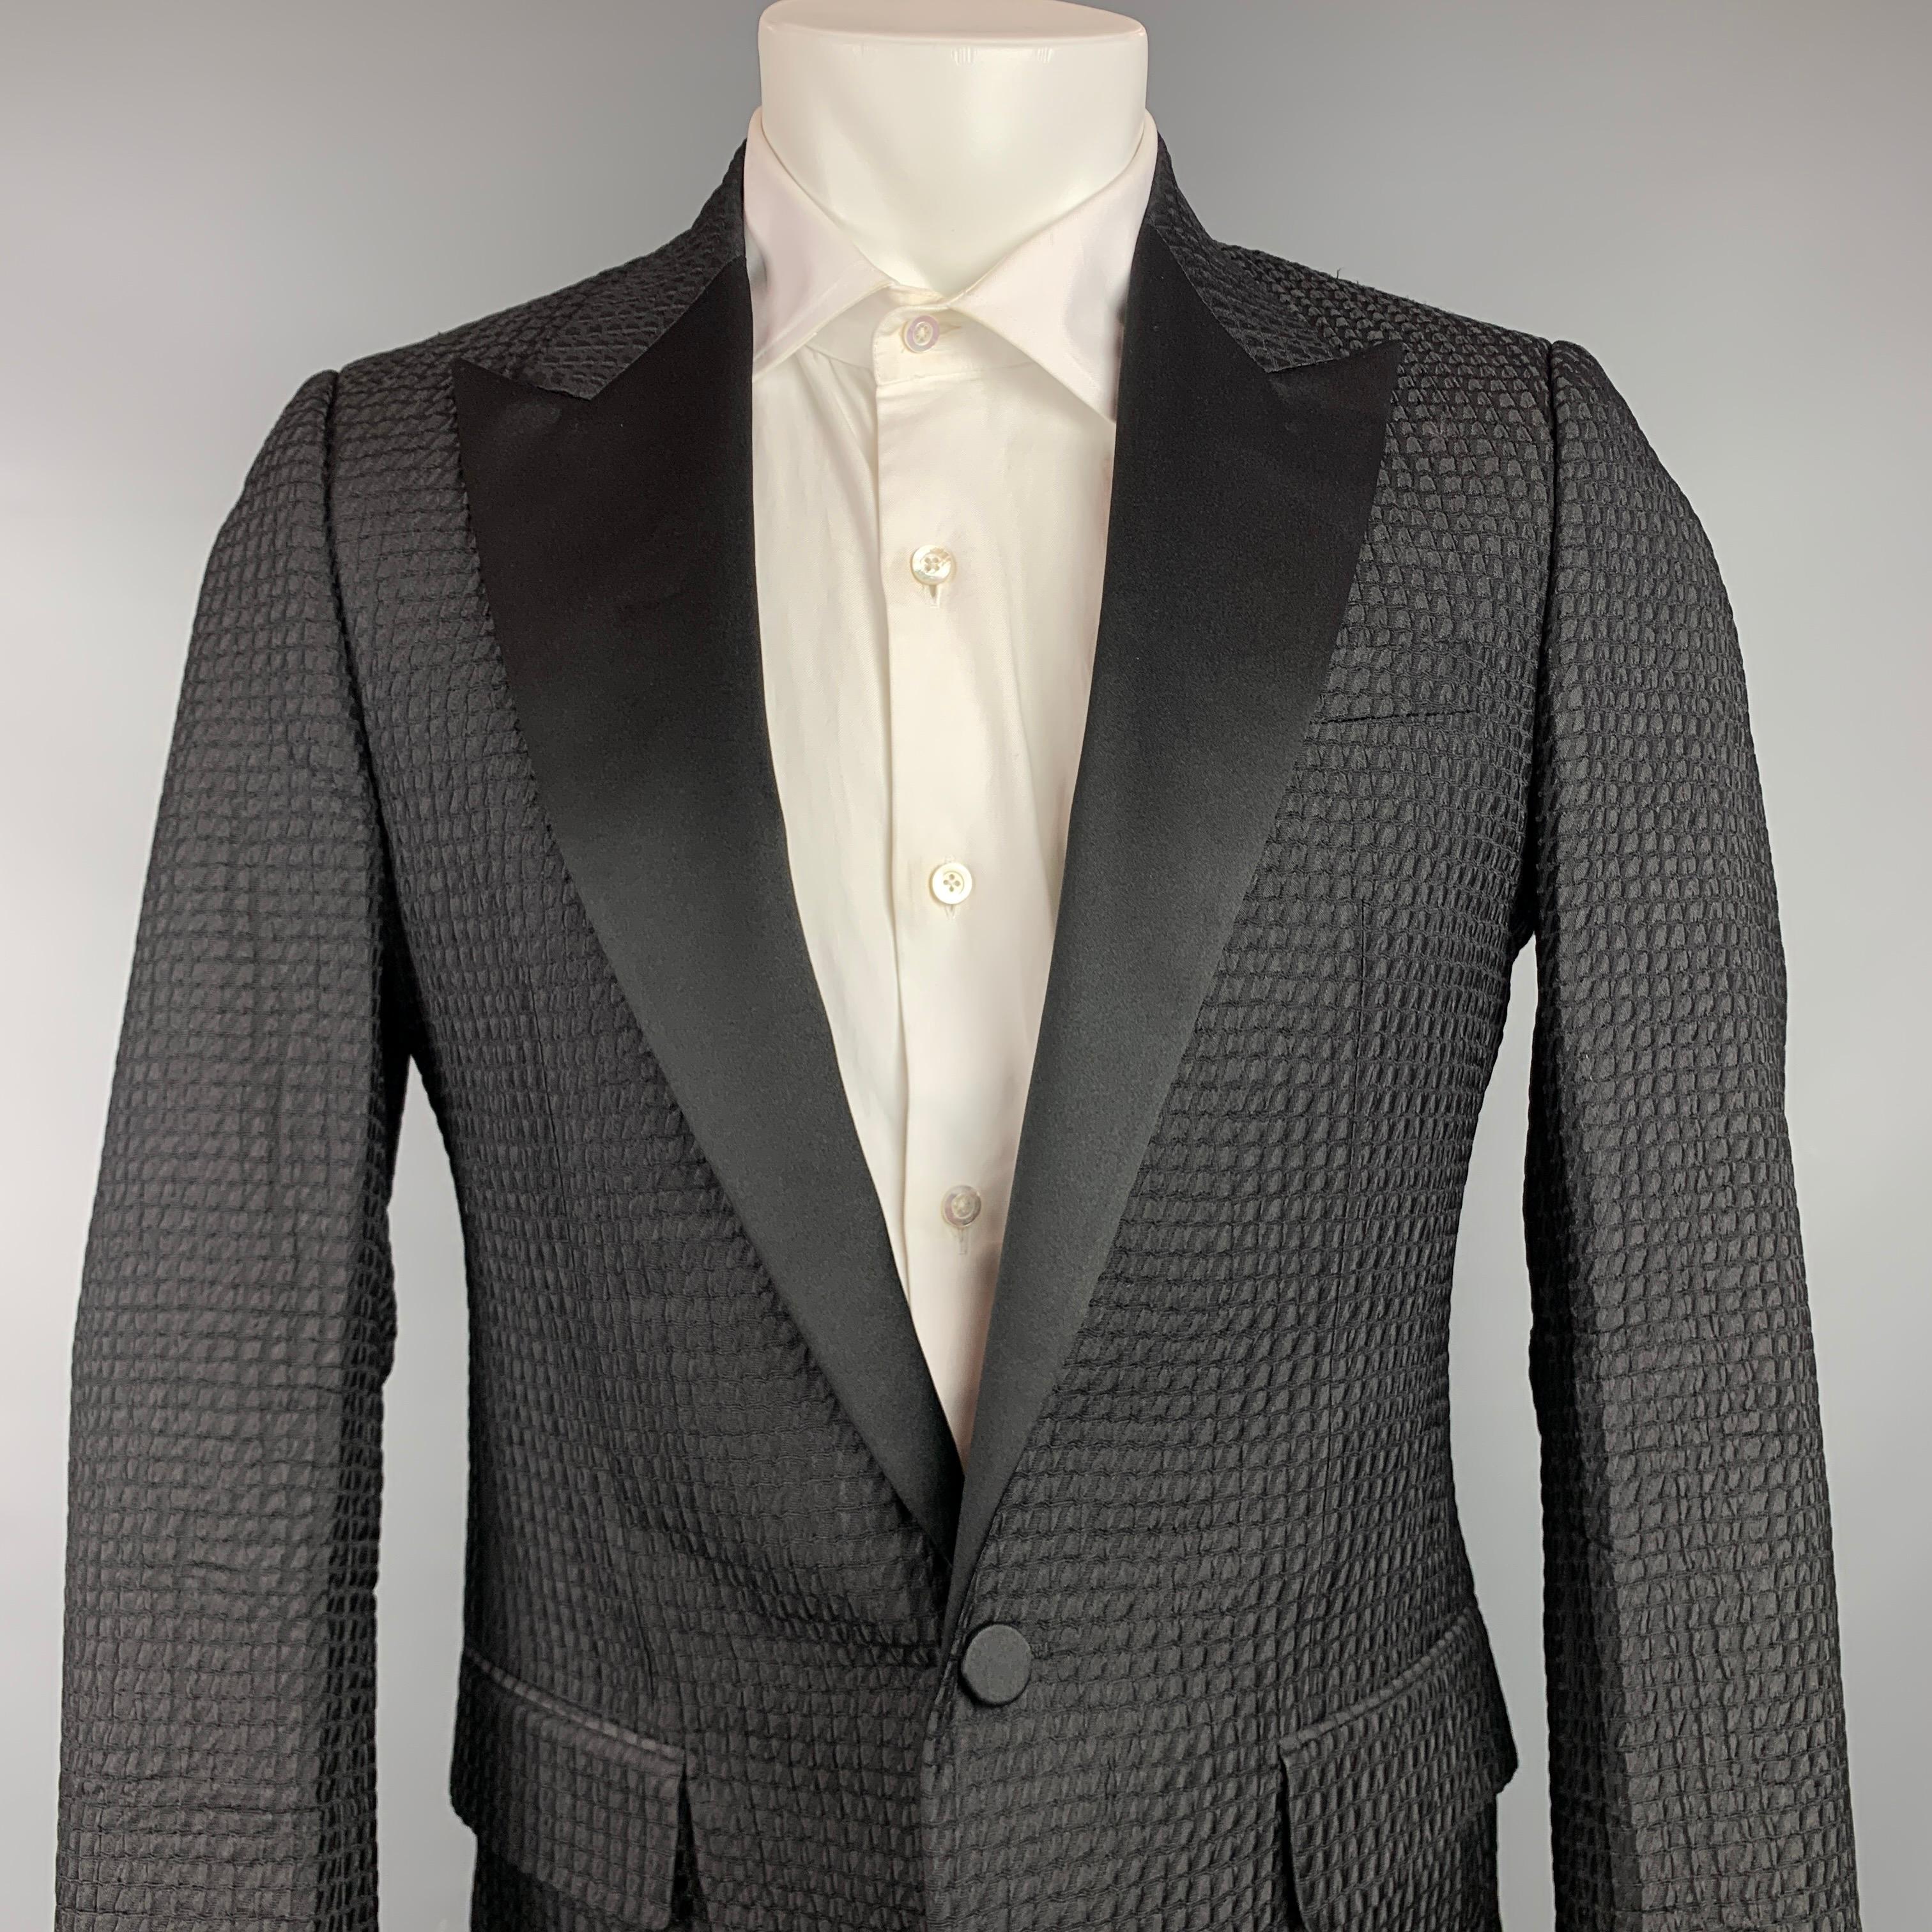 LANVIN sport coat comes in a black textured silk / polyester with a full liner featuring a peak lapel, flap pockets, and a single button closure. Made in Italy.

Very Good Pre-Owned Condition.
Marked: 48

Measurements:

Shoulder: 16.5 in.
Chest: 38